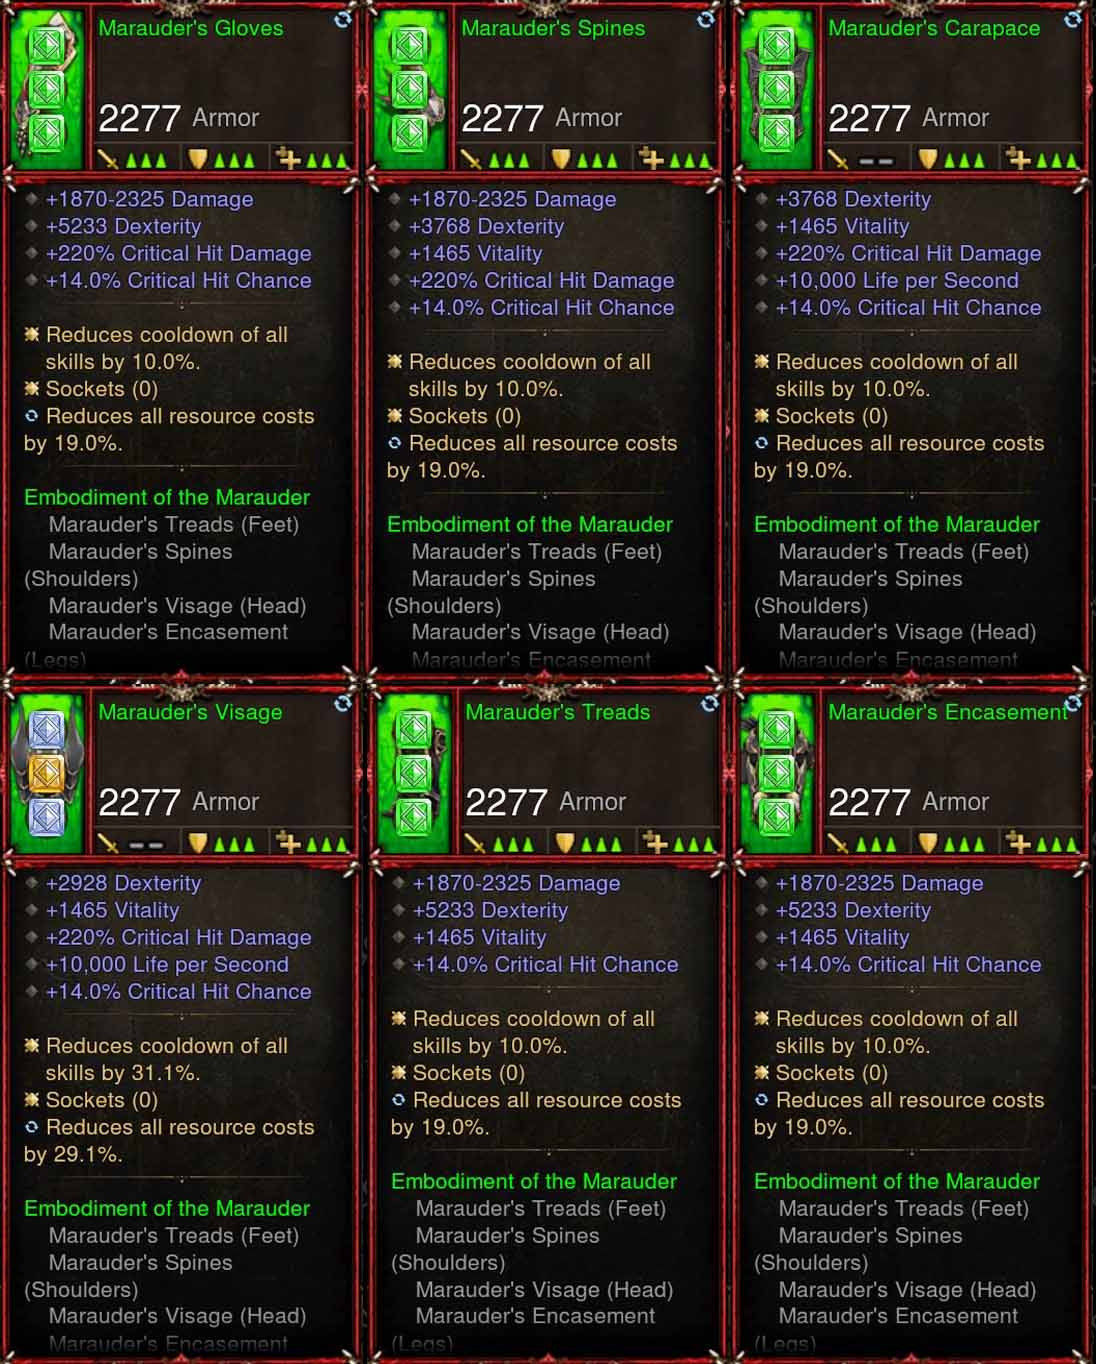 [Primal Ancient] 6x Marauders Demon Hunter Set Diablo 3 Mods ROS Seasonal and Non Seasonal Save Mod - Modded Items and Gear - Hacks - Cheats - Trainers for Playstation 4 - Playstation 5 - Nintendo Switch - Xbox One